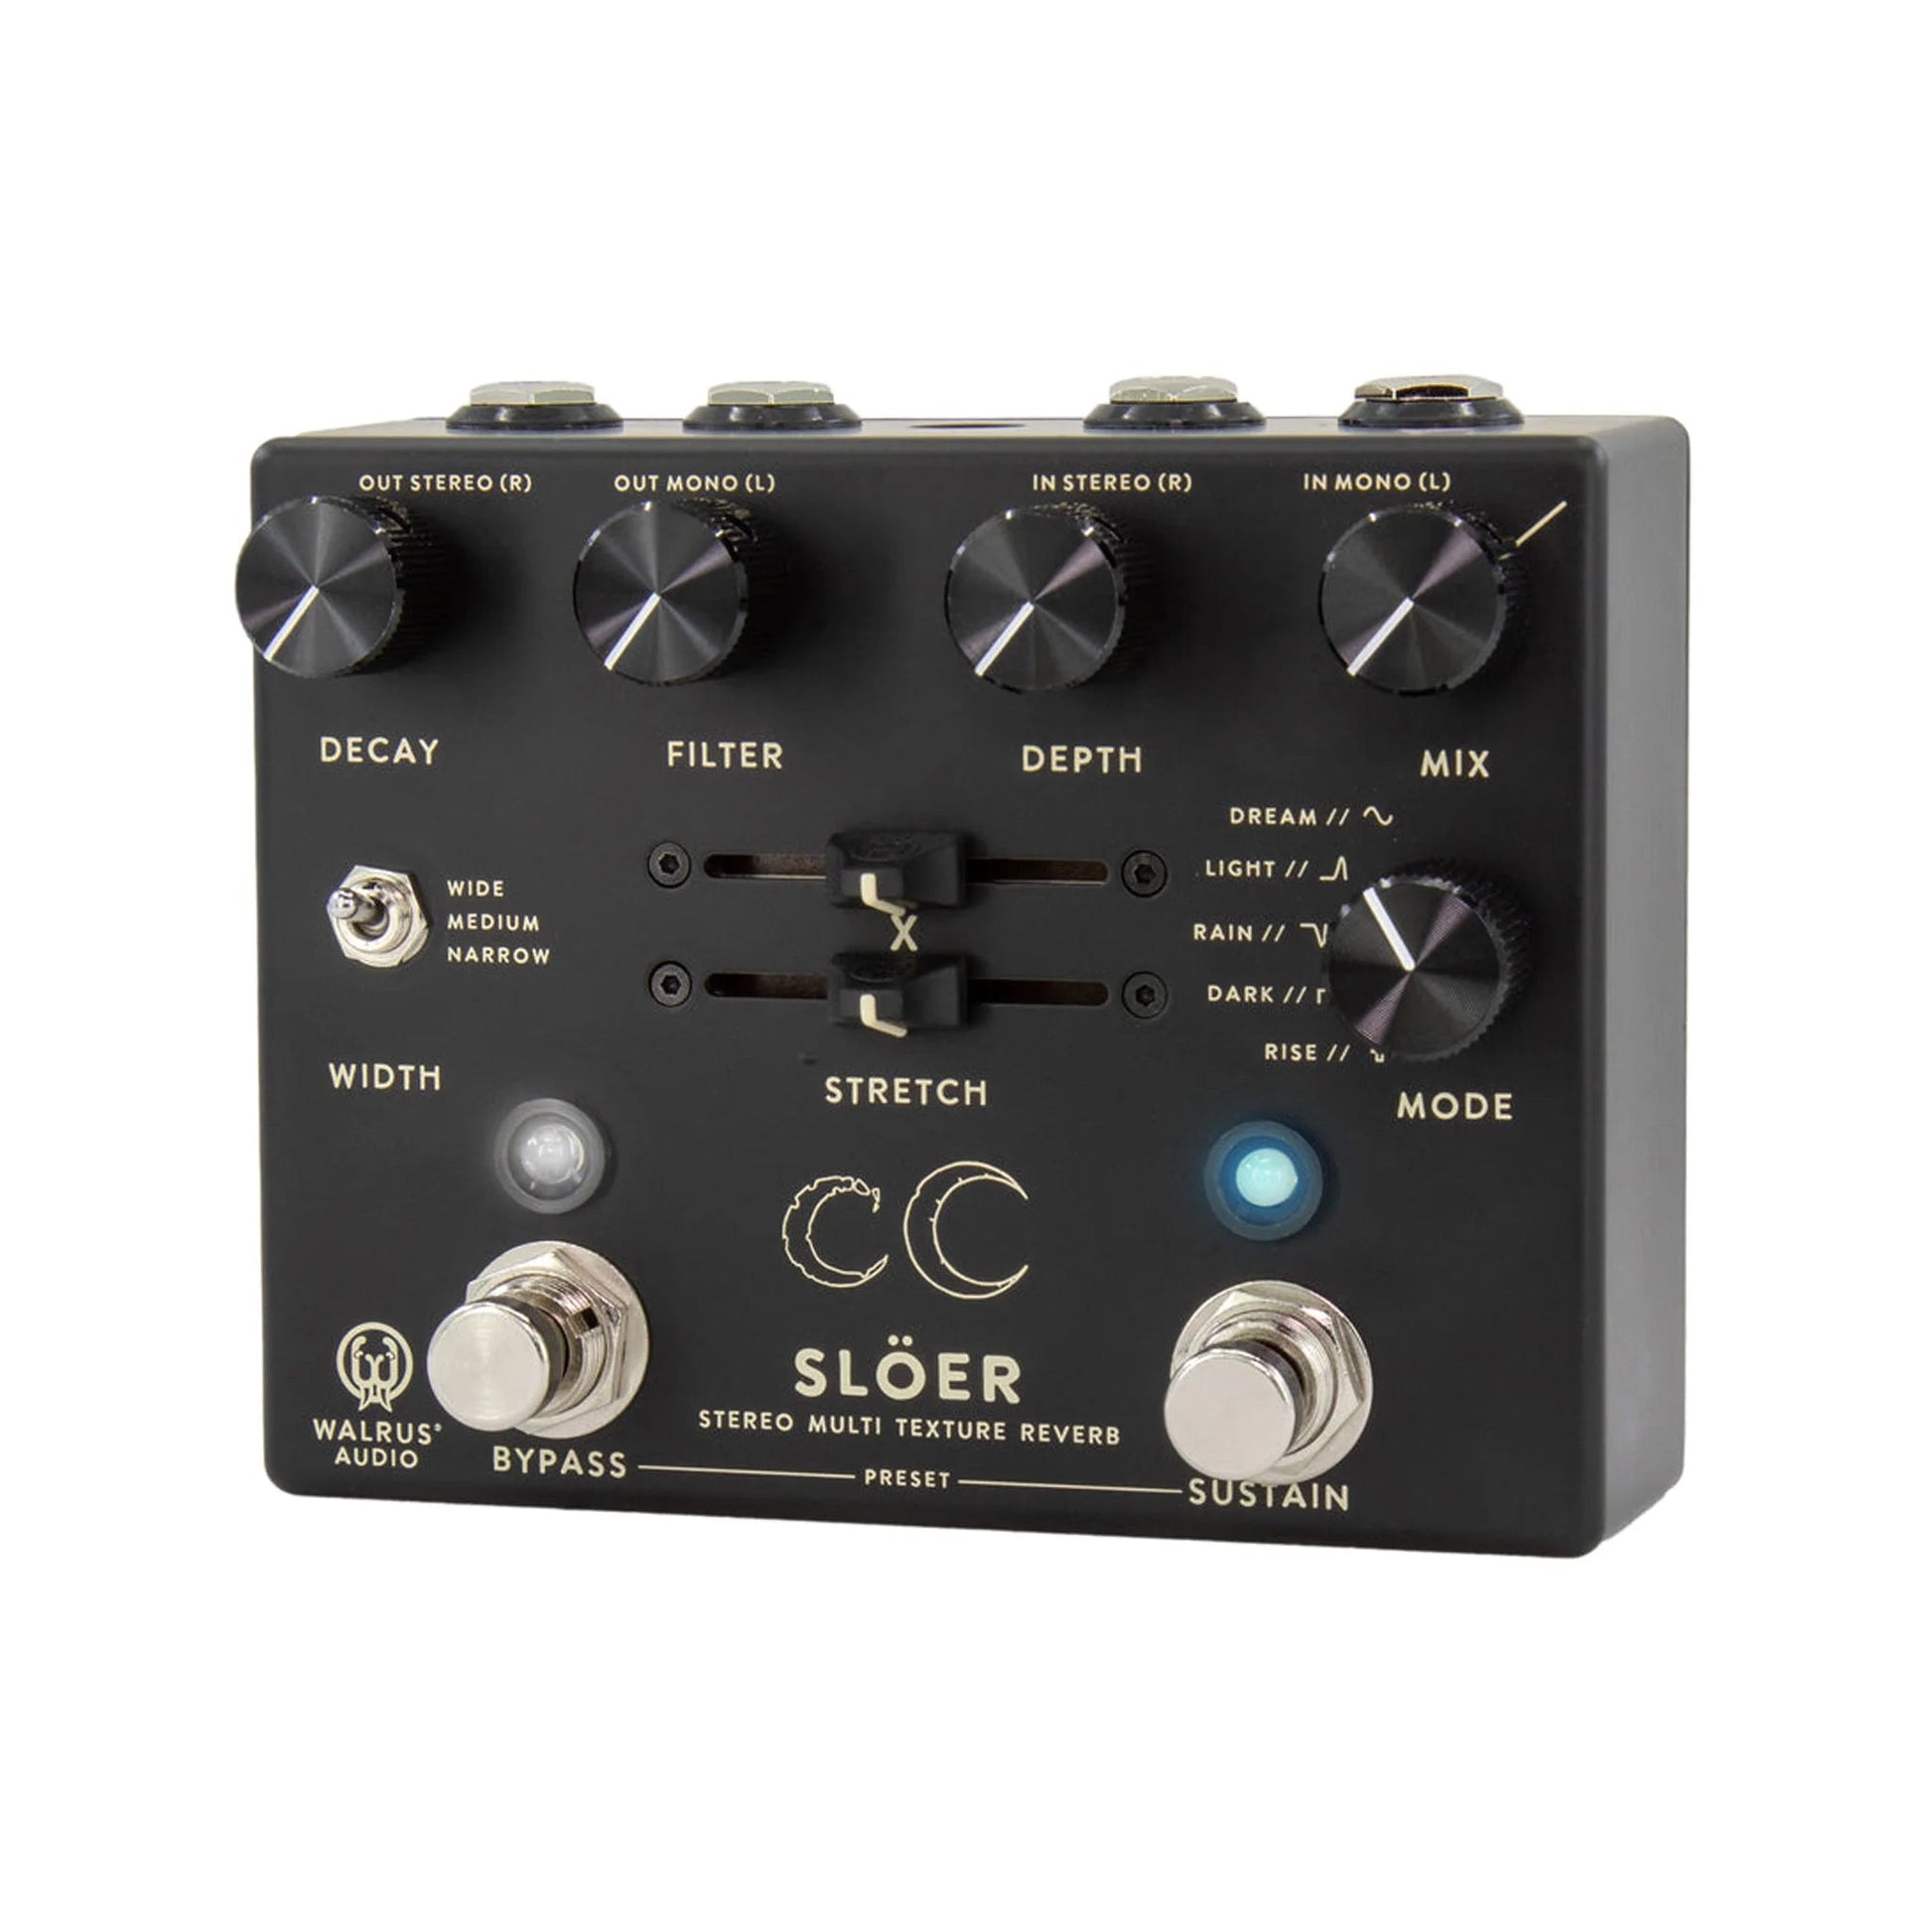 Pedal Guitar Walrus Audio SLOER Stereo Ambient Reverb - Việt Music